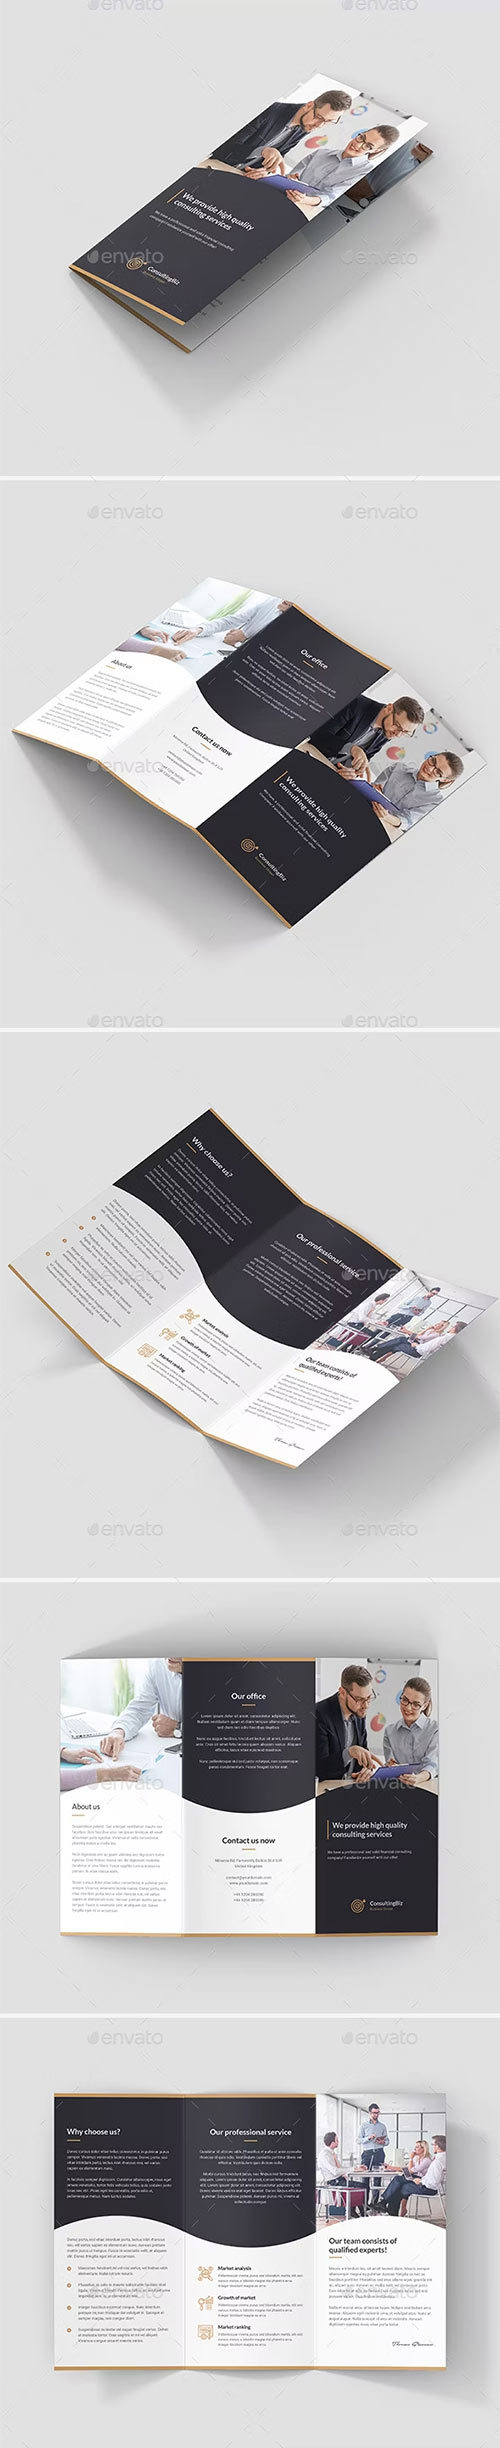 Brochure - Business Consulting Tri-Fold 22015194